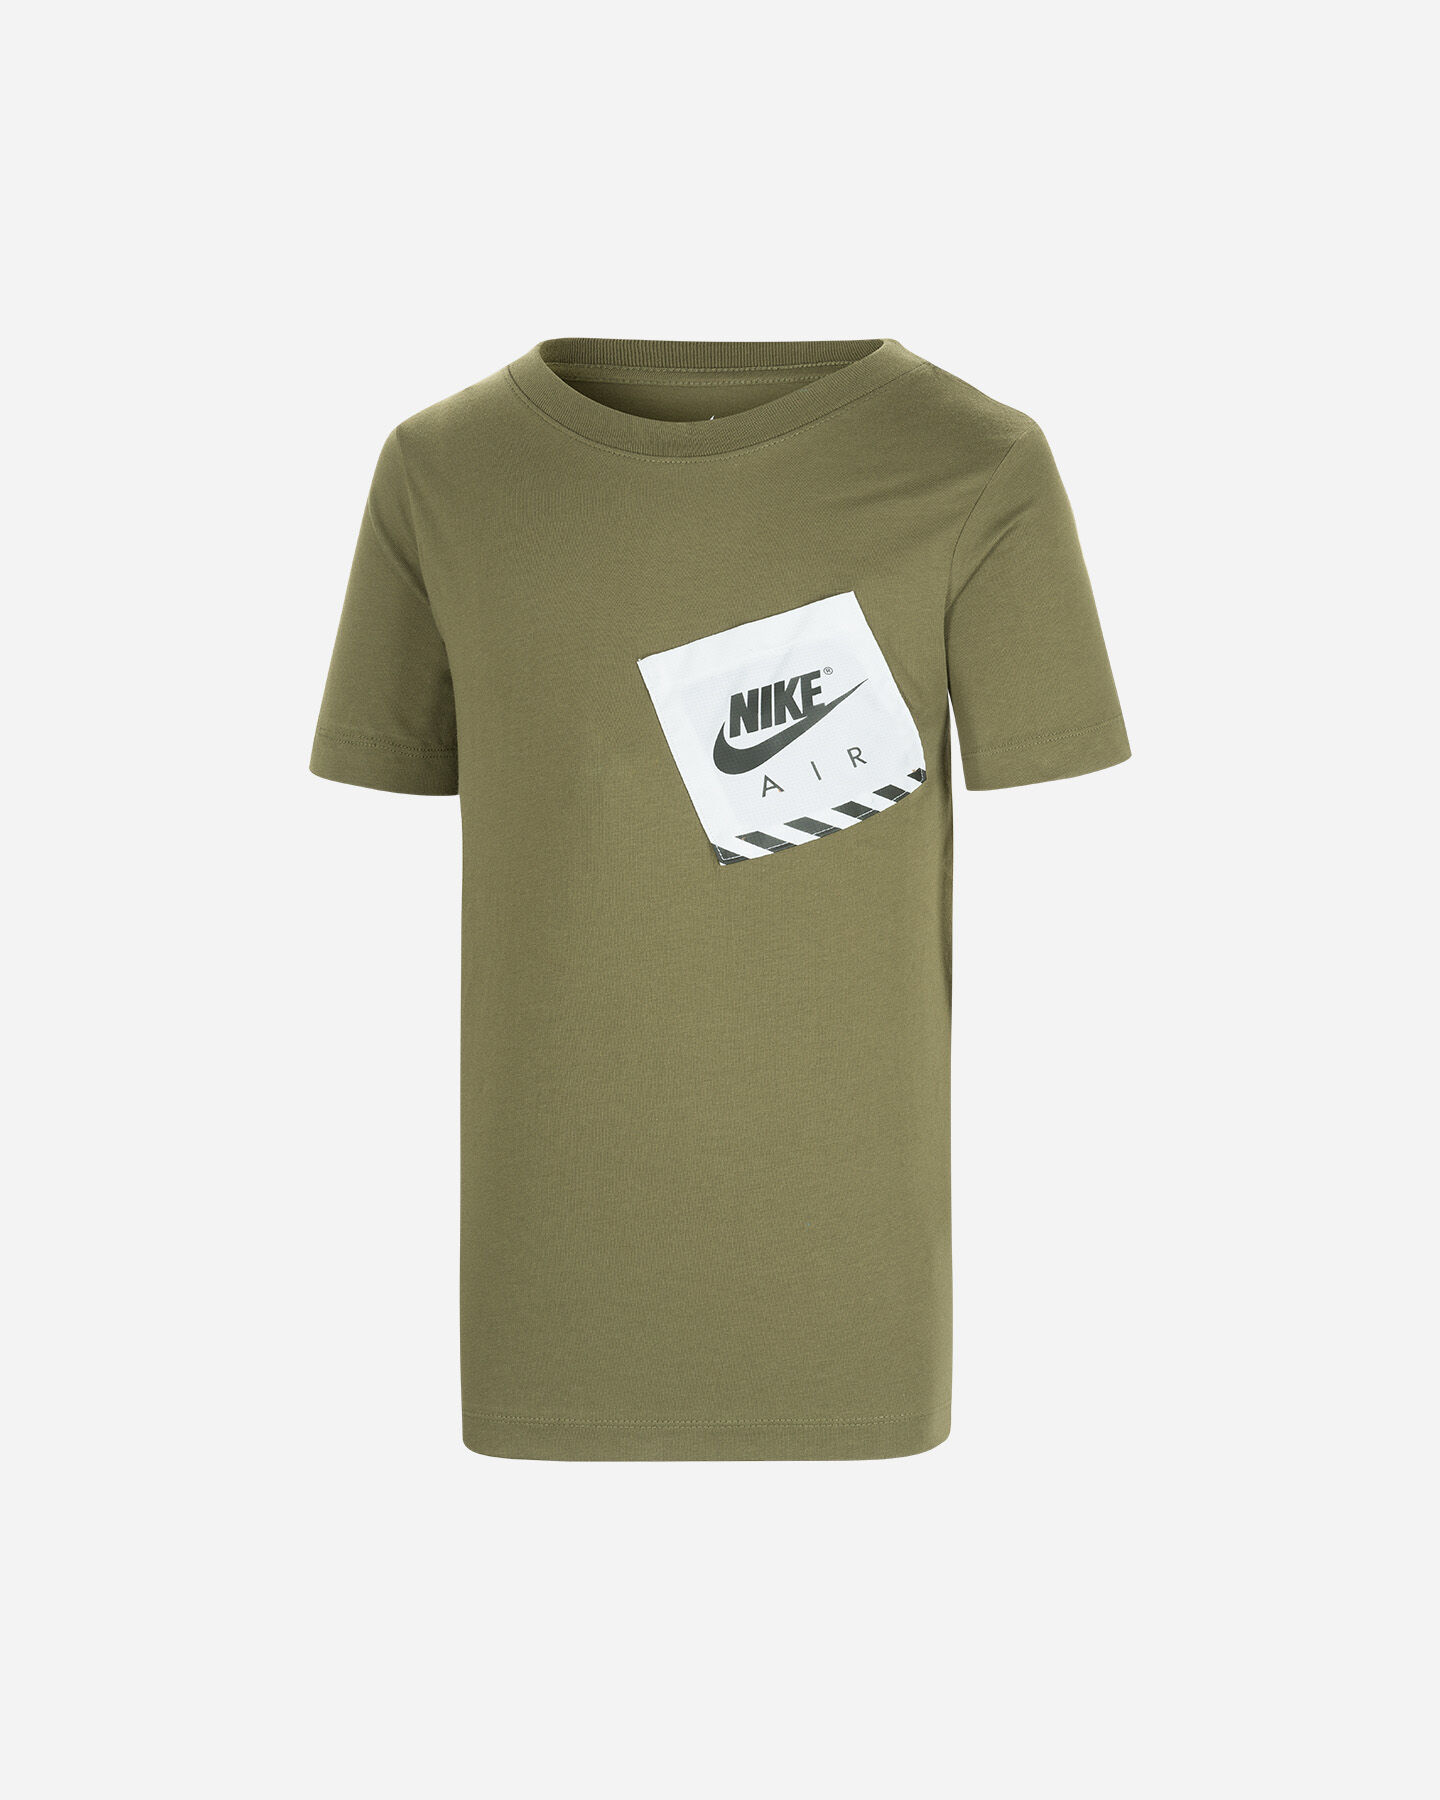  T-Shirt NIKE AIR JR S5301998|222|S scatto 0